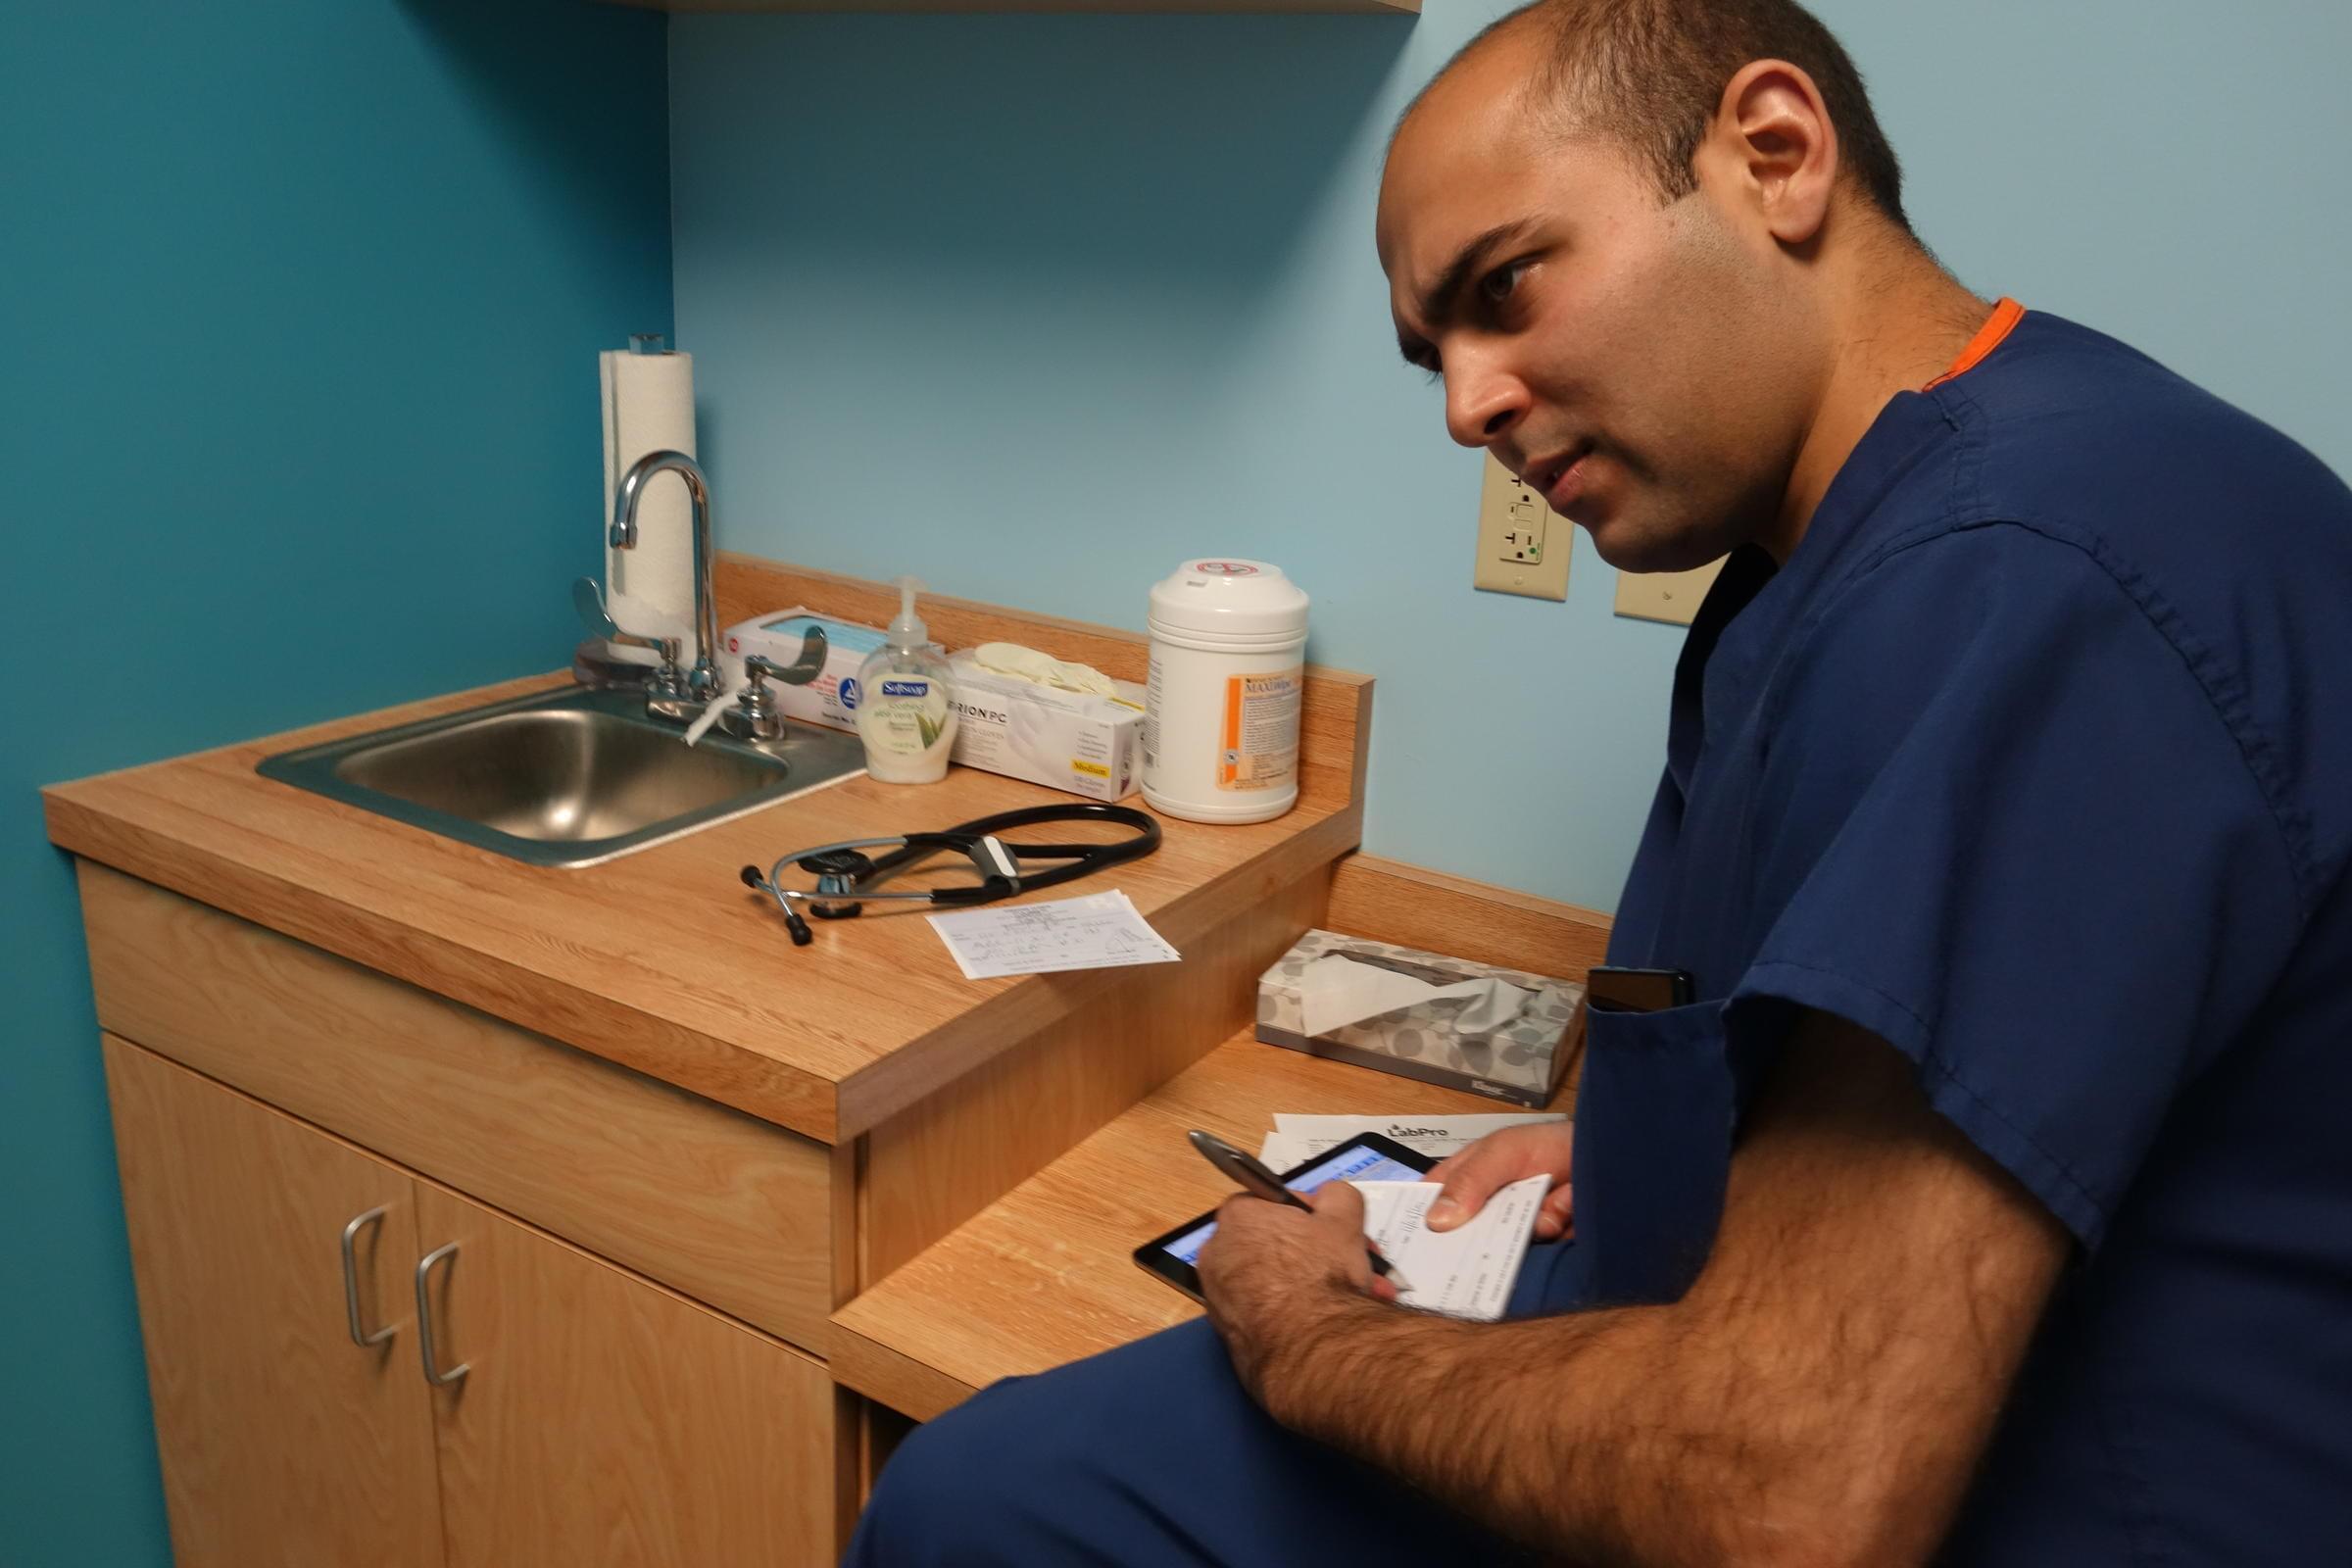 Dr. Jay Joshi's patients use telemedicine to compliment patients' opioid addiction treatment.